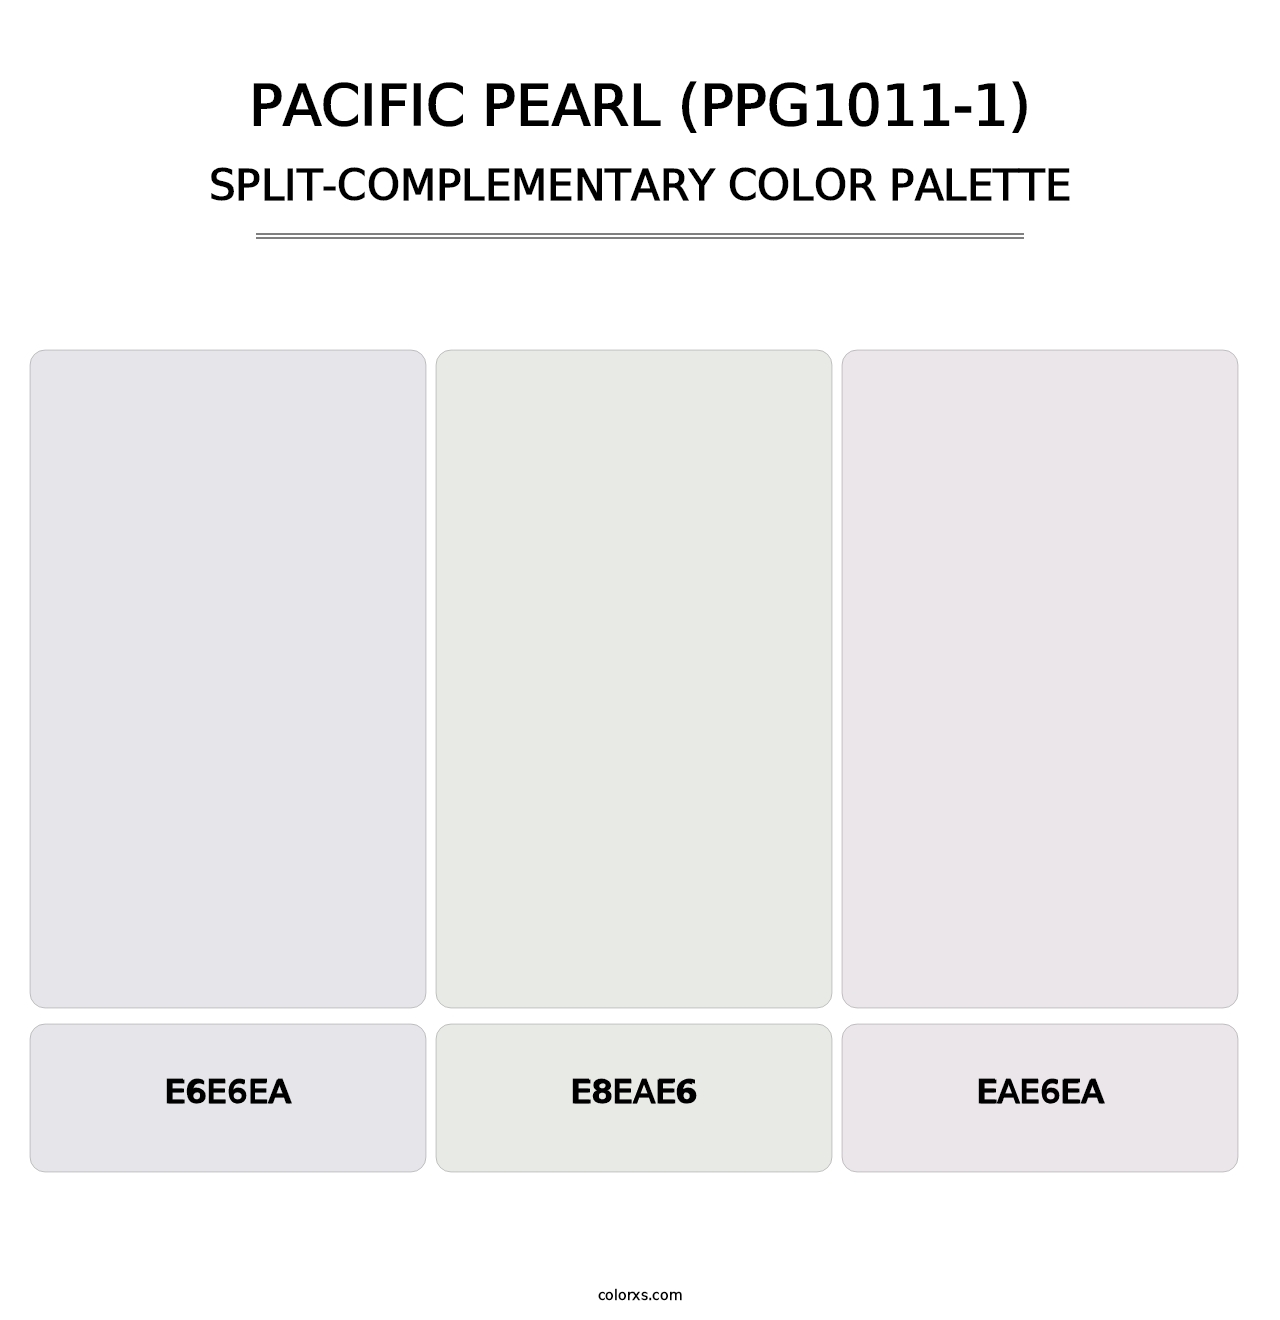 Pacific Pearl (PPG1011-1) - Split-Complementary Color Palette